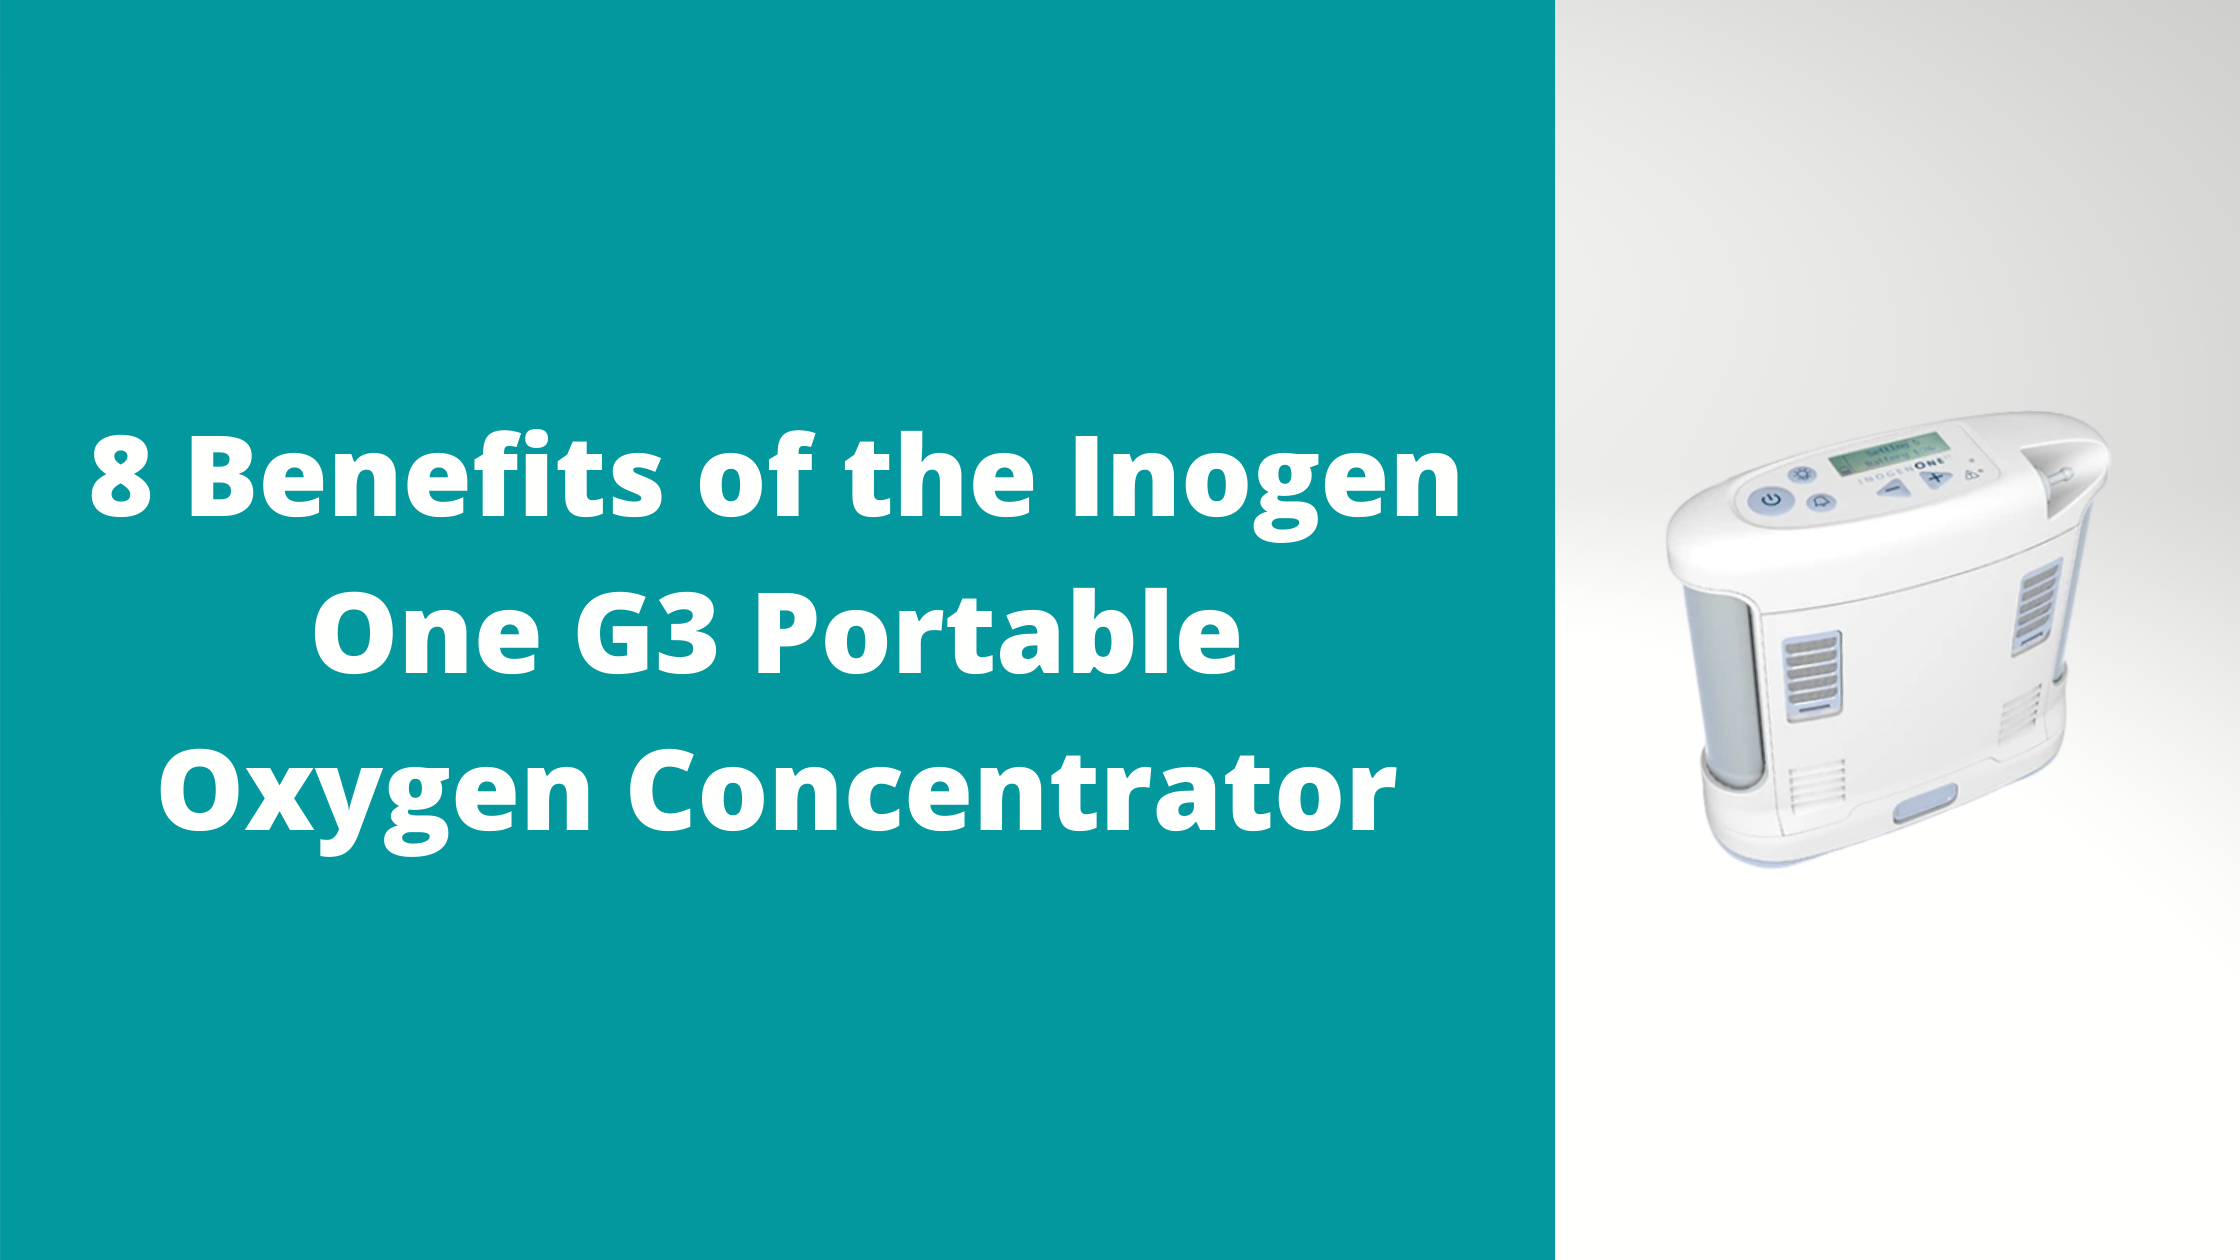 8 Benefits of the Inogen One G3 Portable Oxygen Concentrator